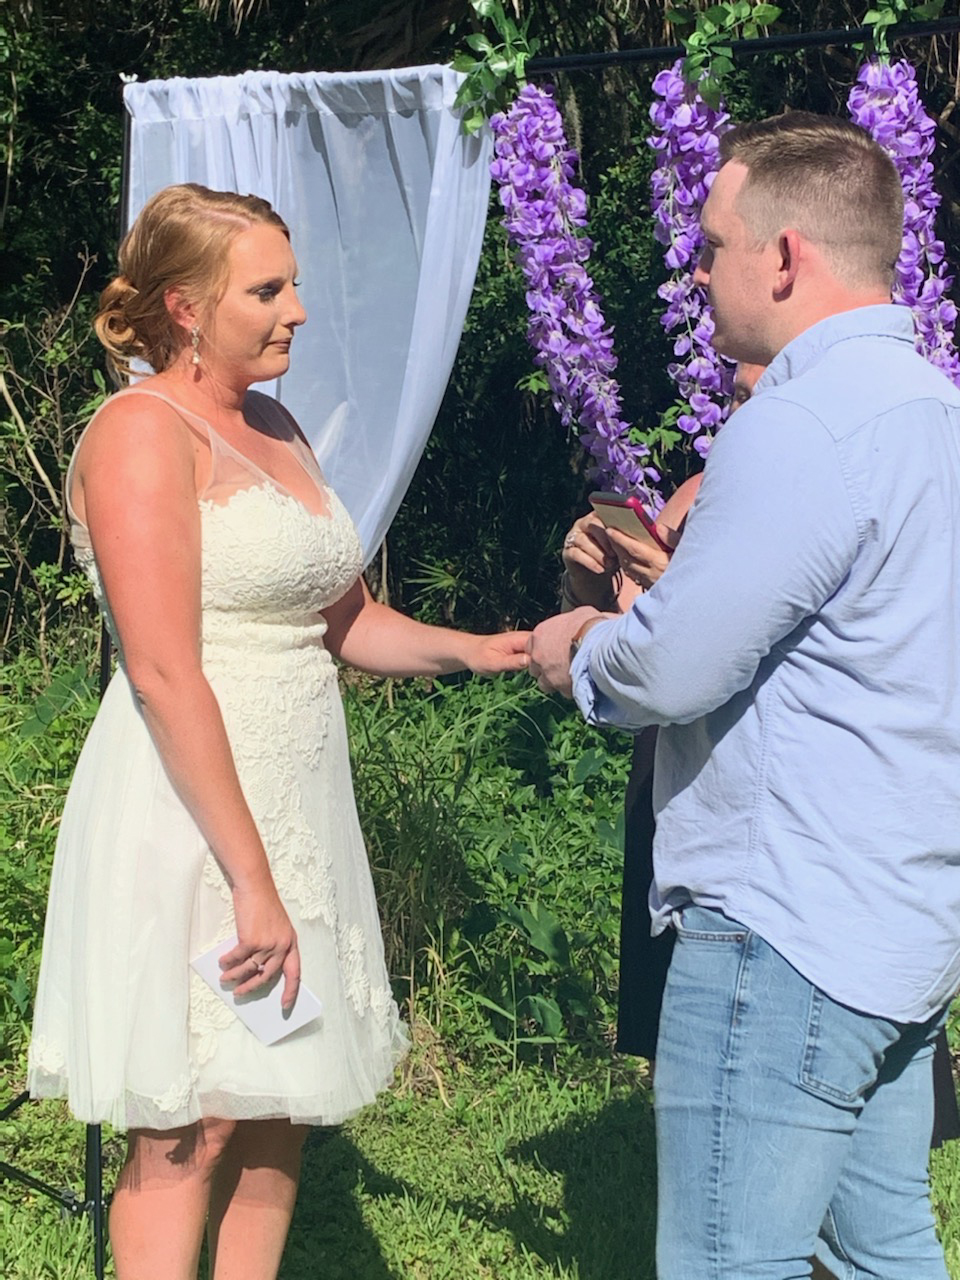 Conner and Spencer Young share their vows with each other during their small wedding. Both say sharing their vows was a special moment for them.